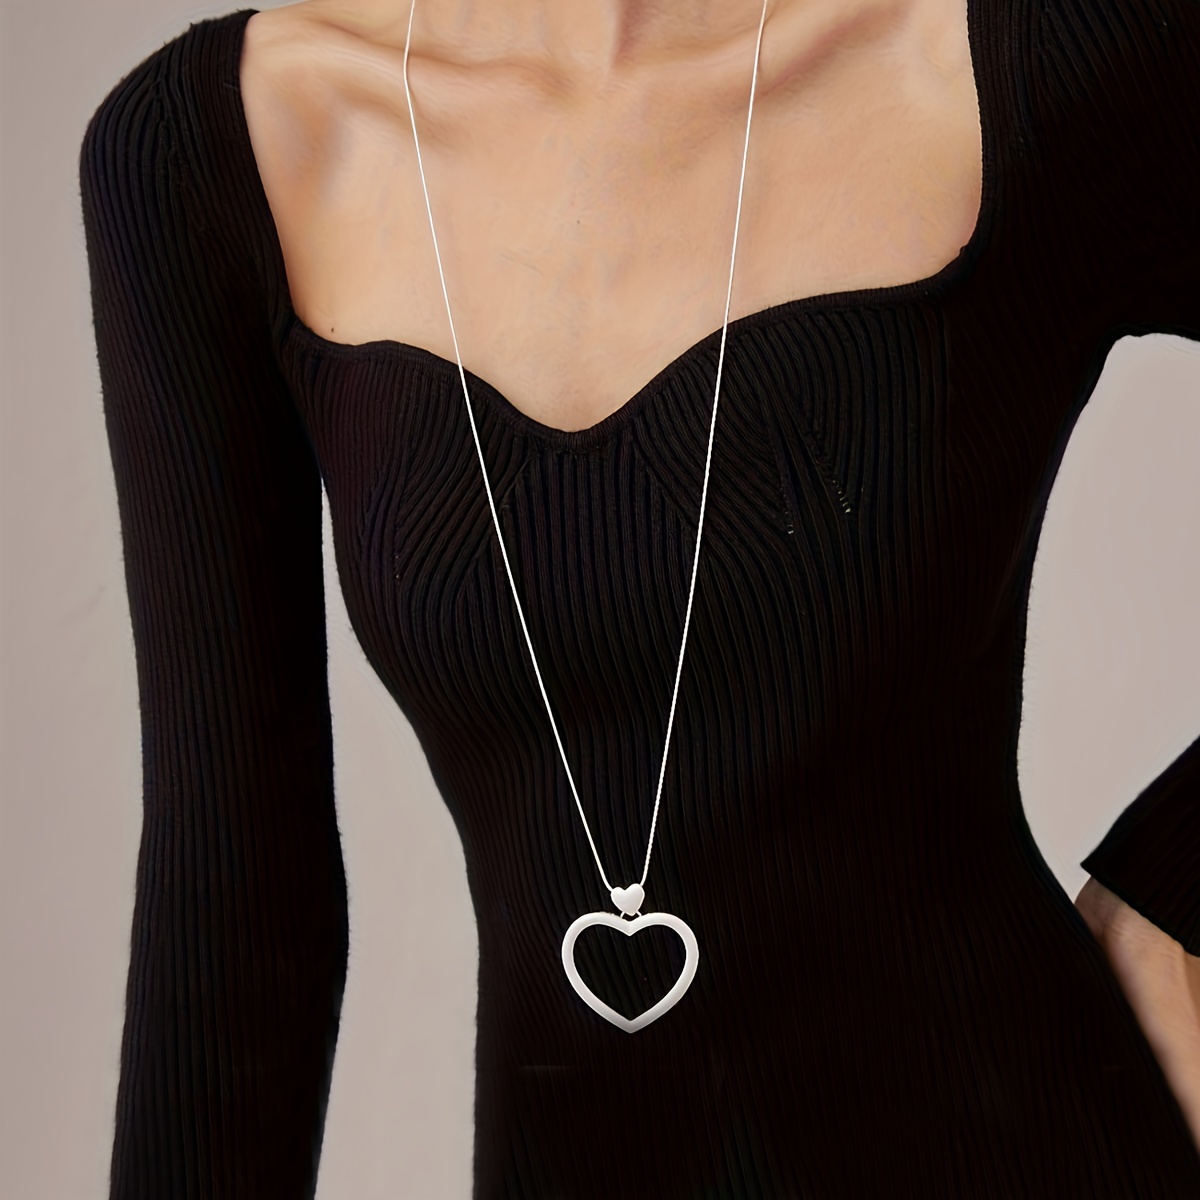 

Hollow Out Heart-shaped Pendant Necklace Minimalist Long Sweater Chain Statement Necklace Jewelry Accessories For Women